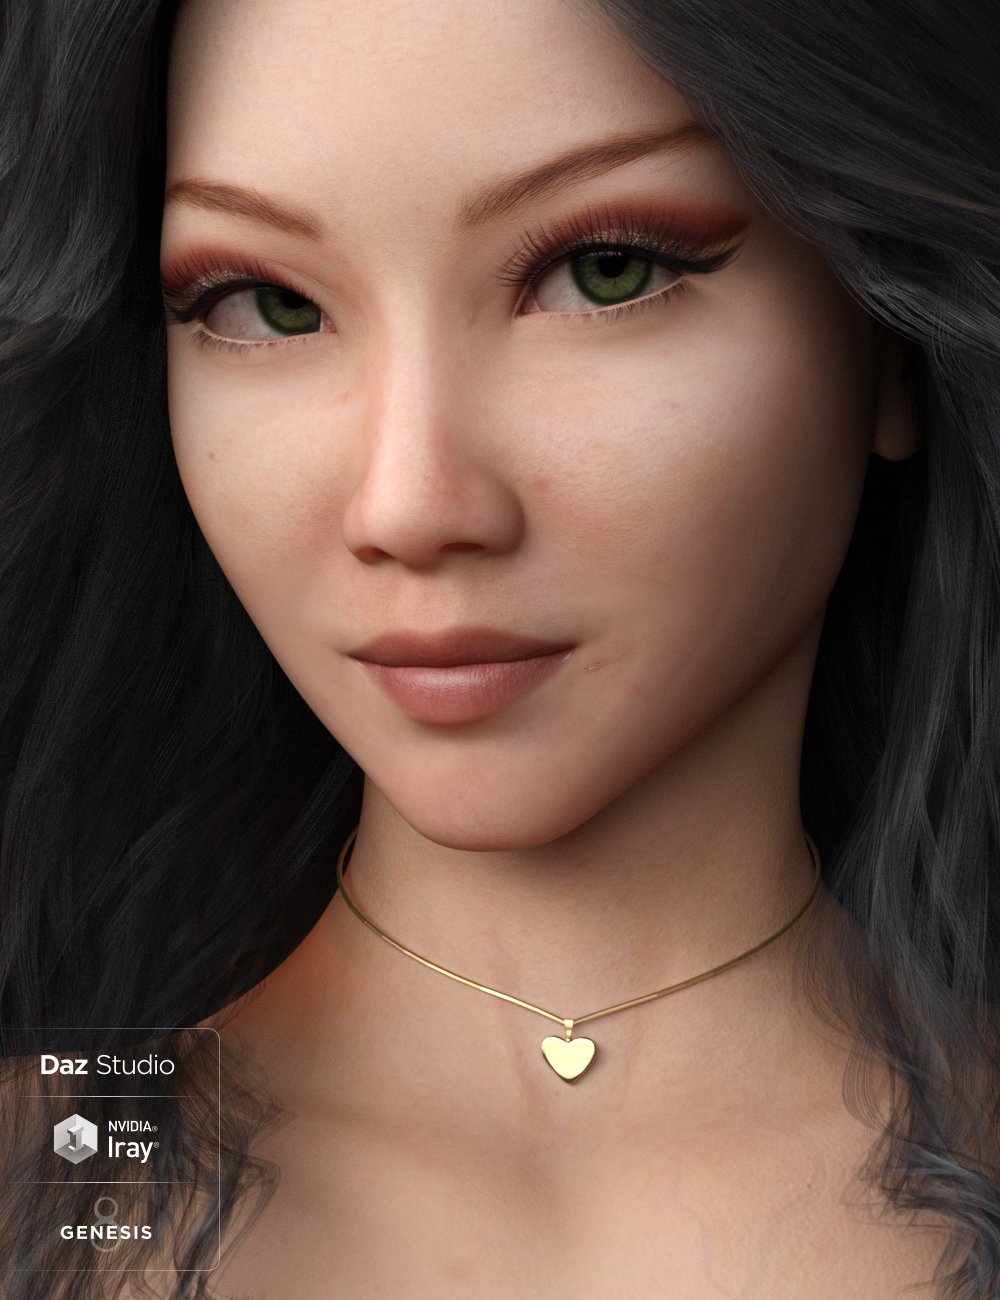 Nakano for Genesis 8 Female by: iSourceTextures, 3D Models by Daz 3D